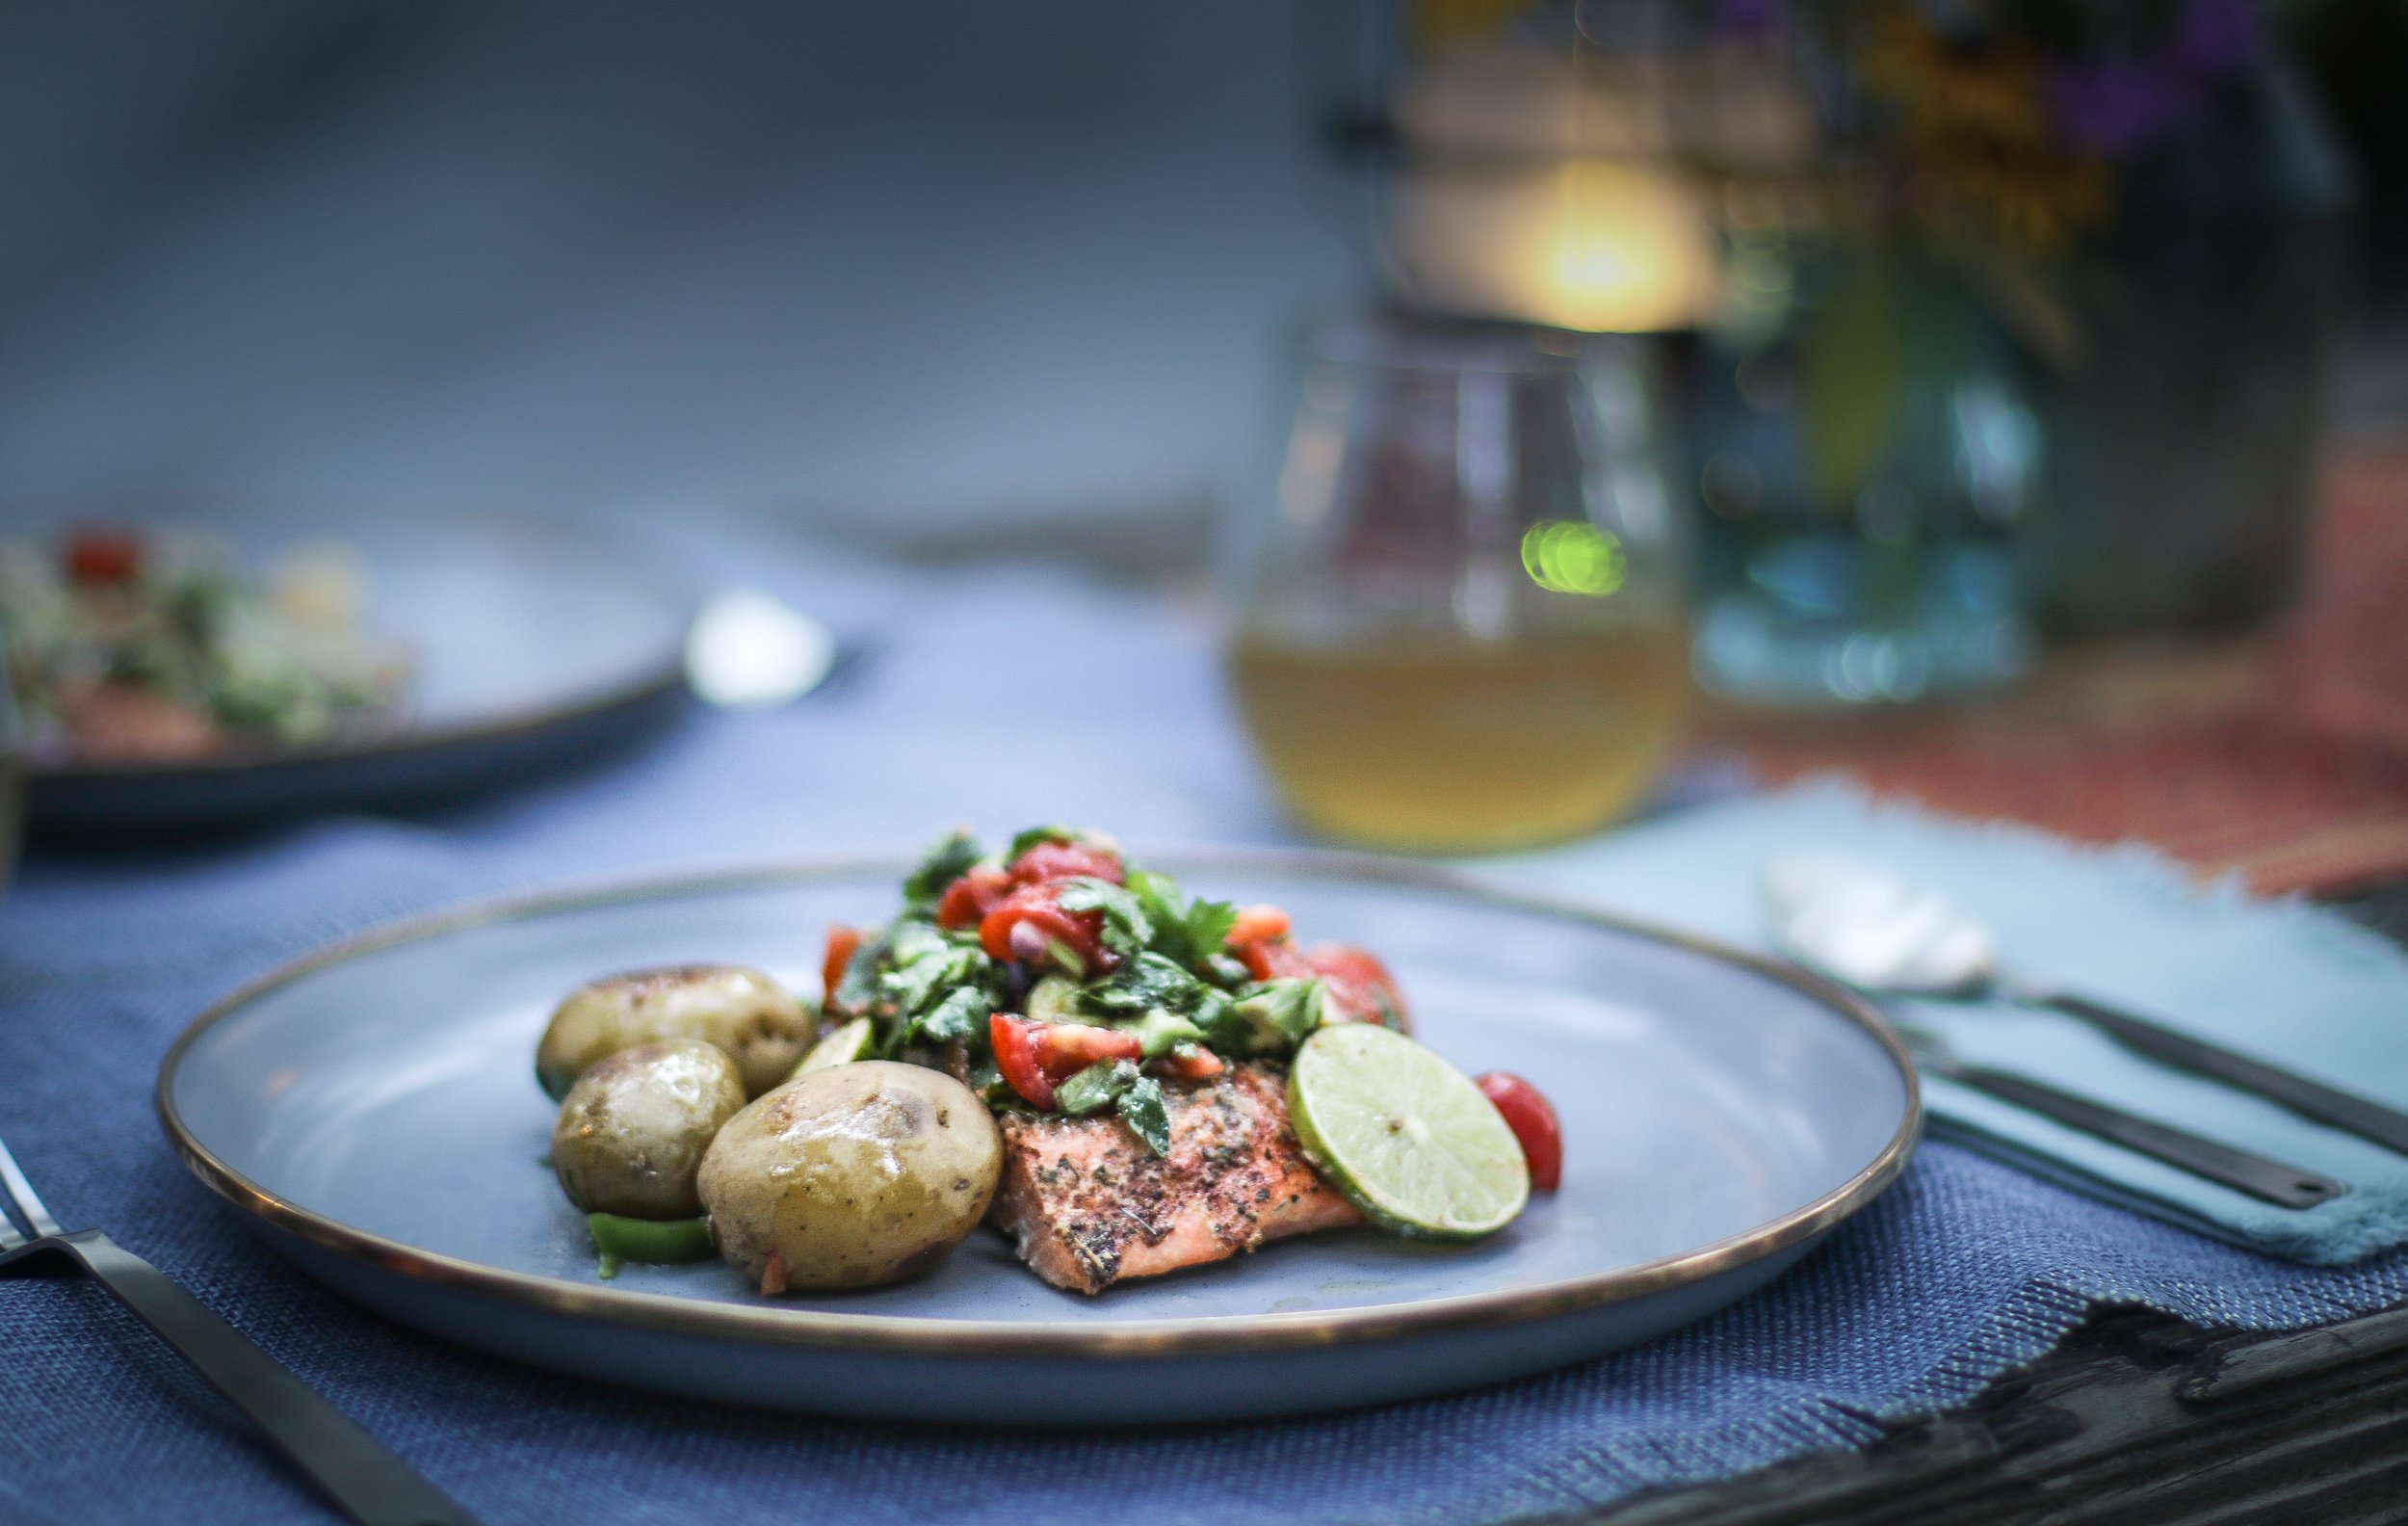 Paprika Lime Salmon with fresh Salsa - A Southern-Inspired Recipe on Plate with Iced Tea Place Setting.jpg